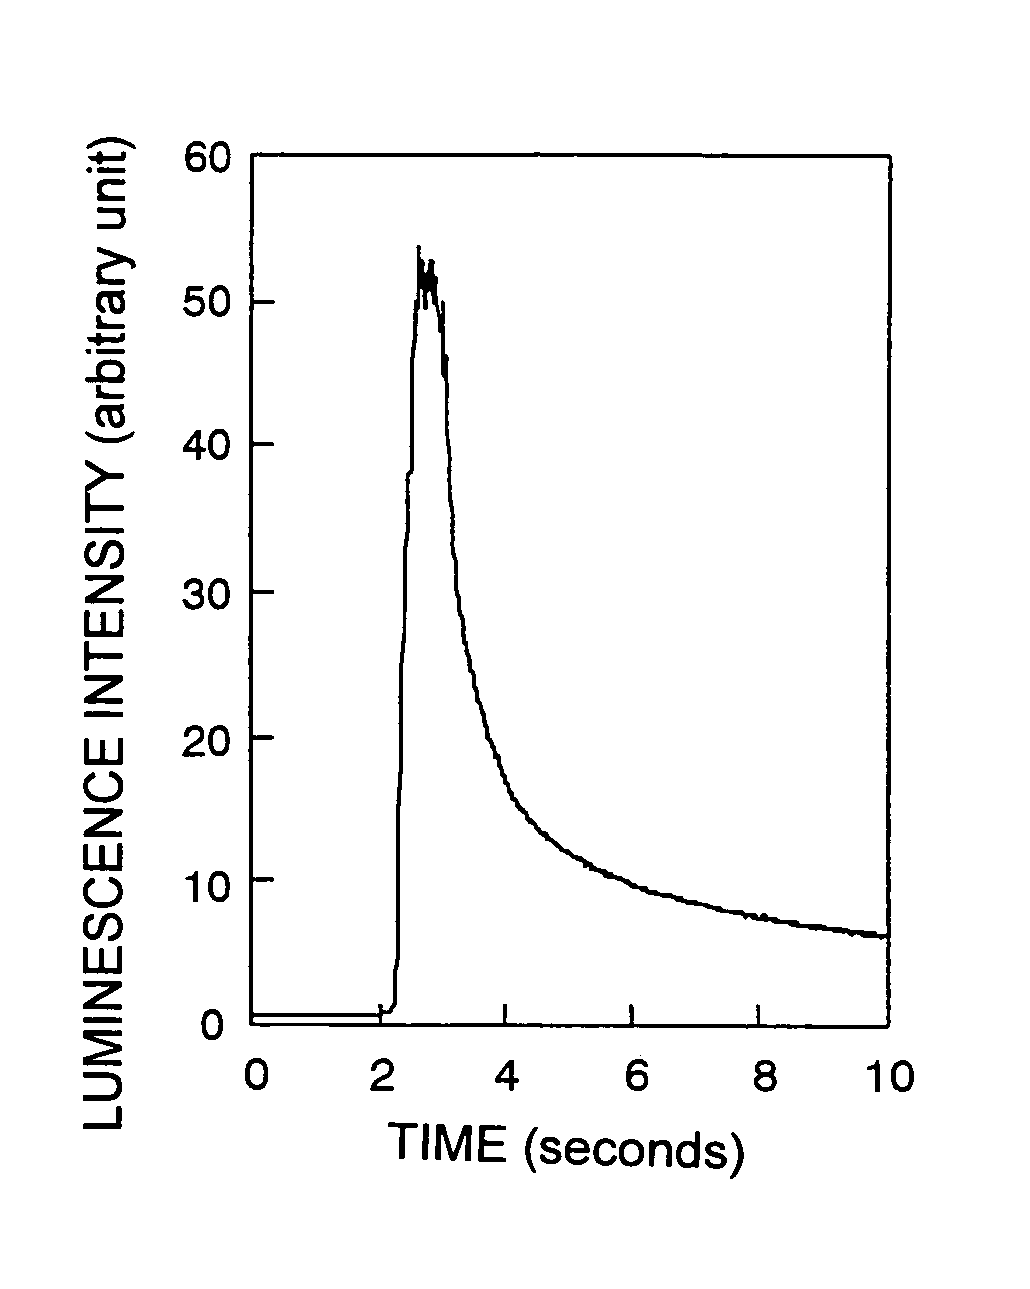 Mechanoluminescence material and process for producing the same